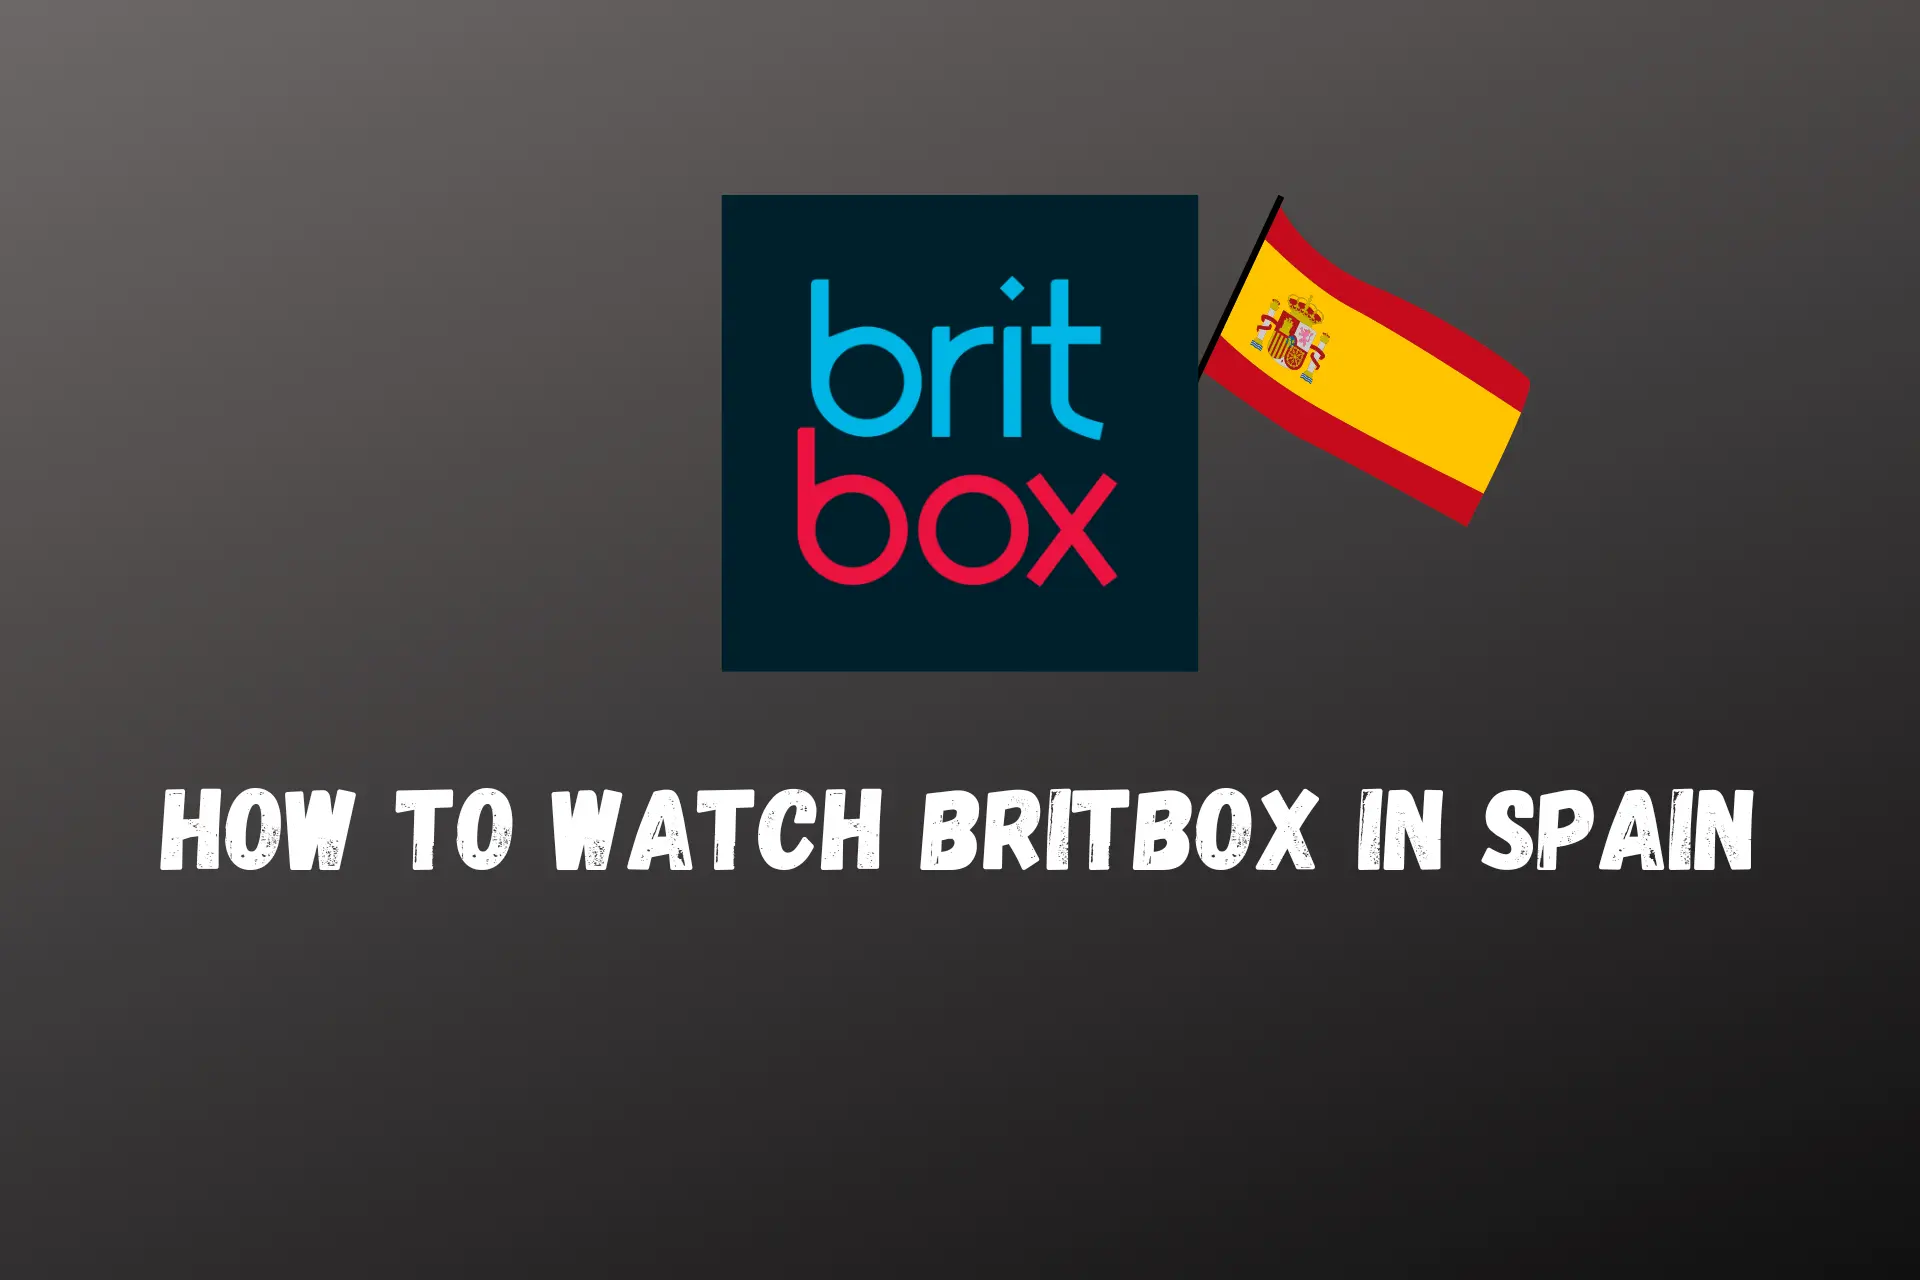 How to Watch BritBox in Spain